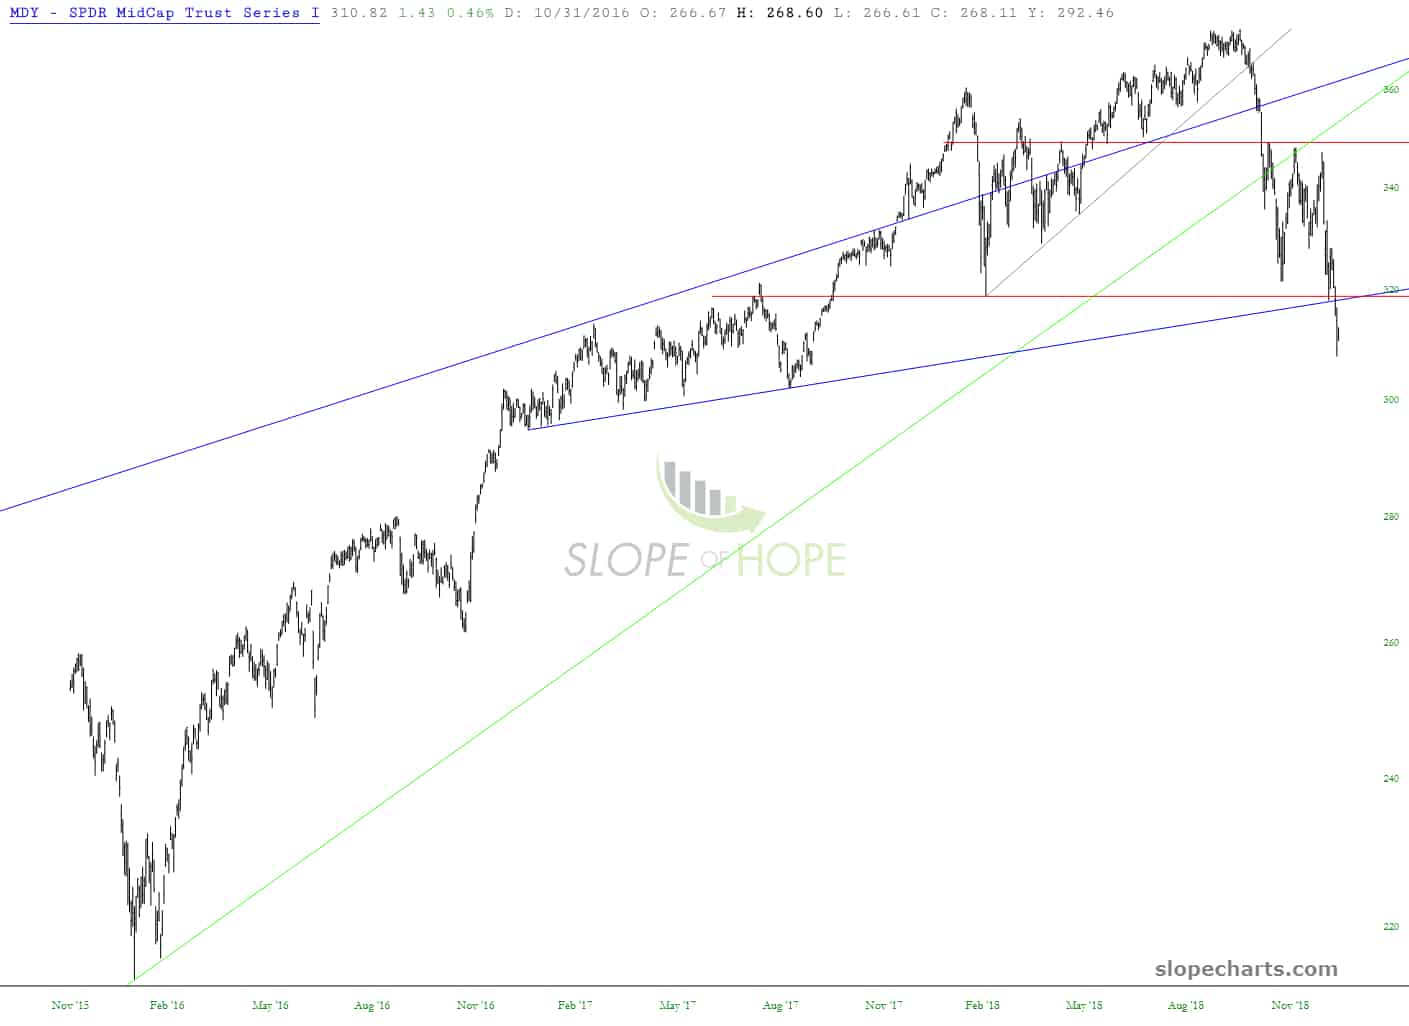 SPDR S&P MidCap 400: Failed Trendline And A Head-And-Shoulders